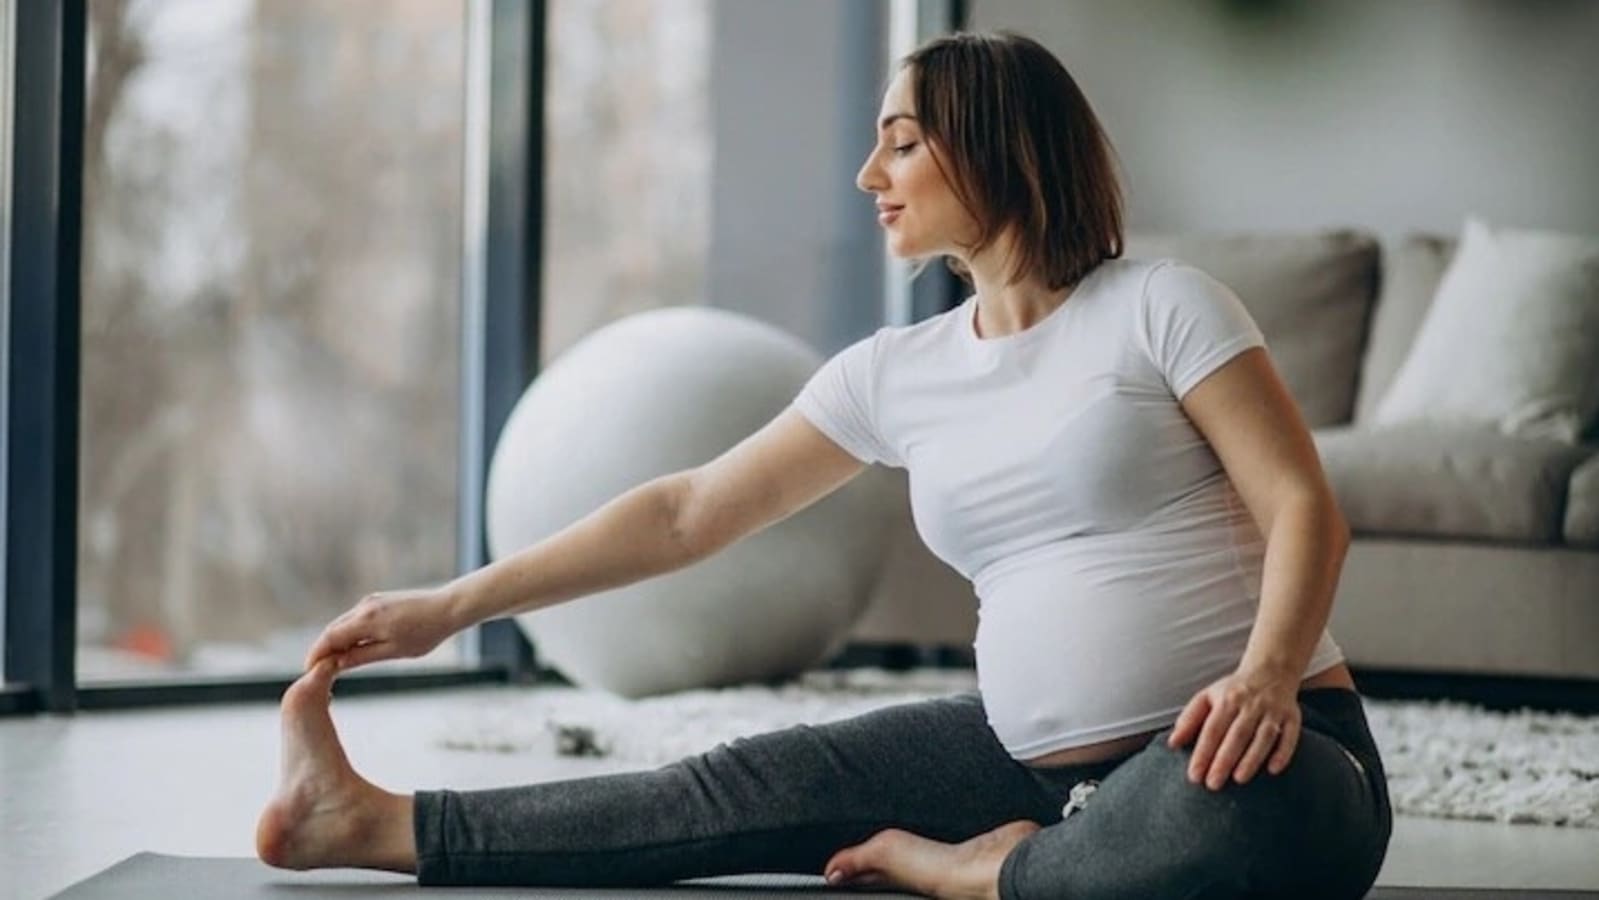 Pregnancy workout: 7 effective exercises for expecting mothers